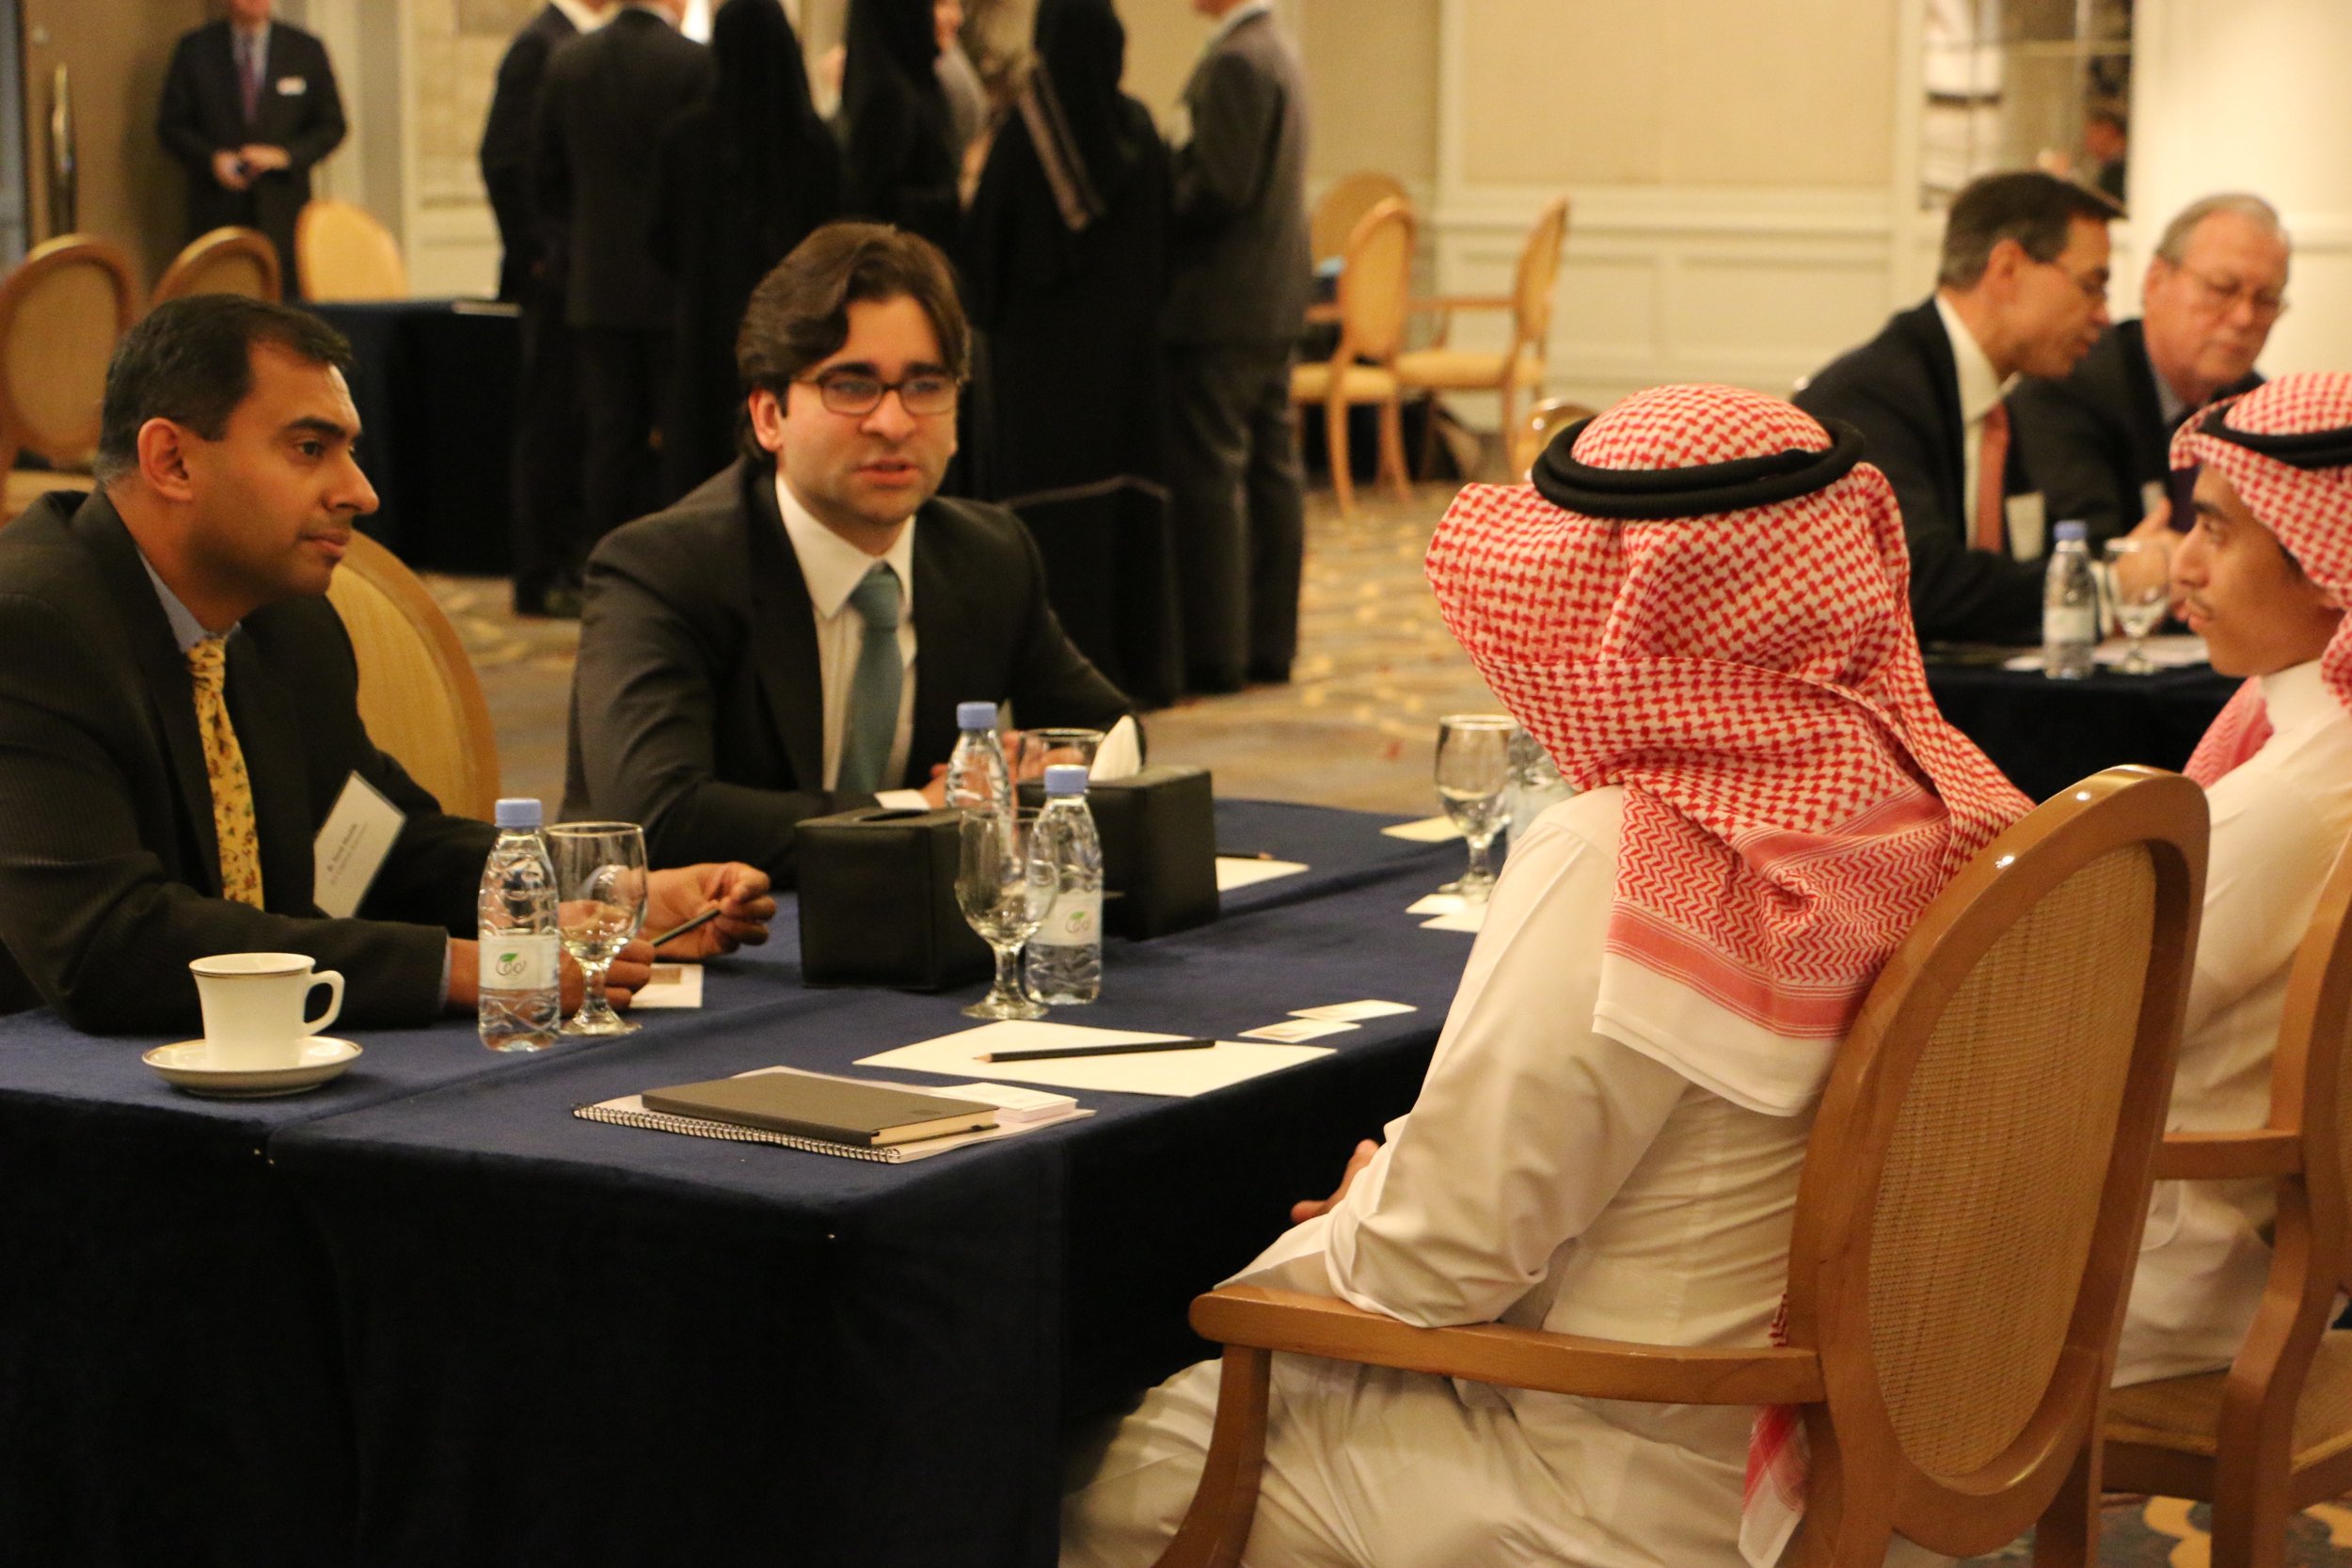 After Embassy Introductions, Delegates Discuss